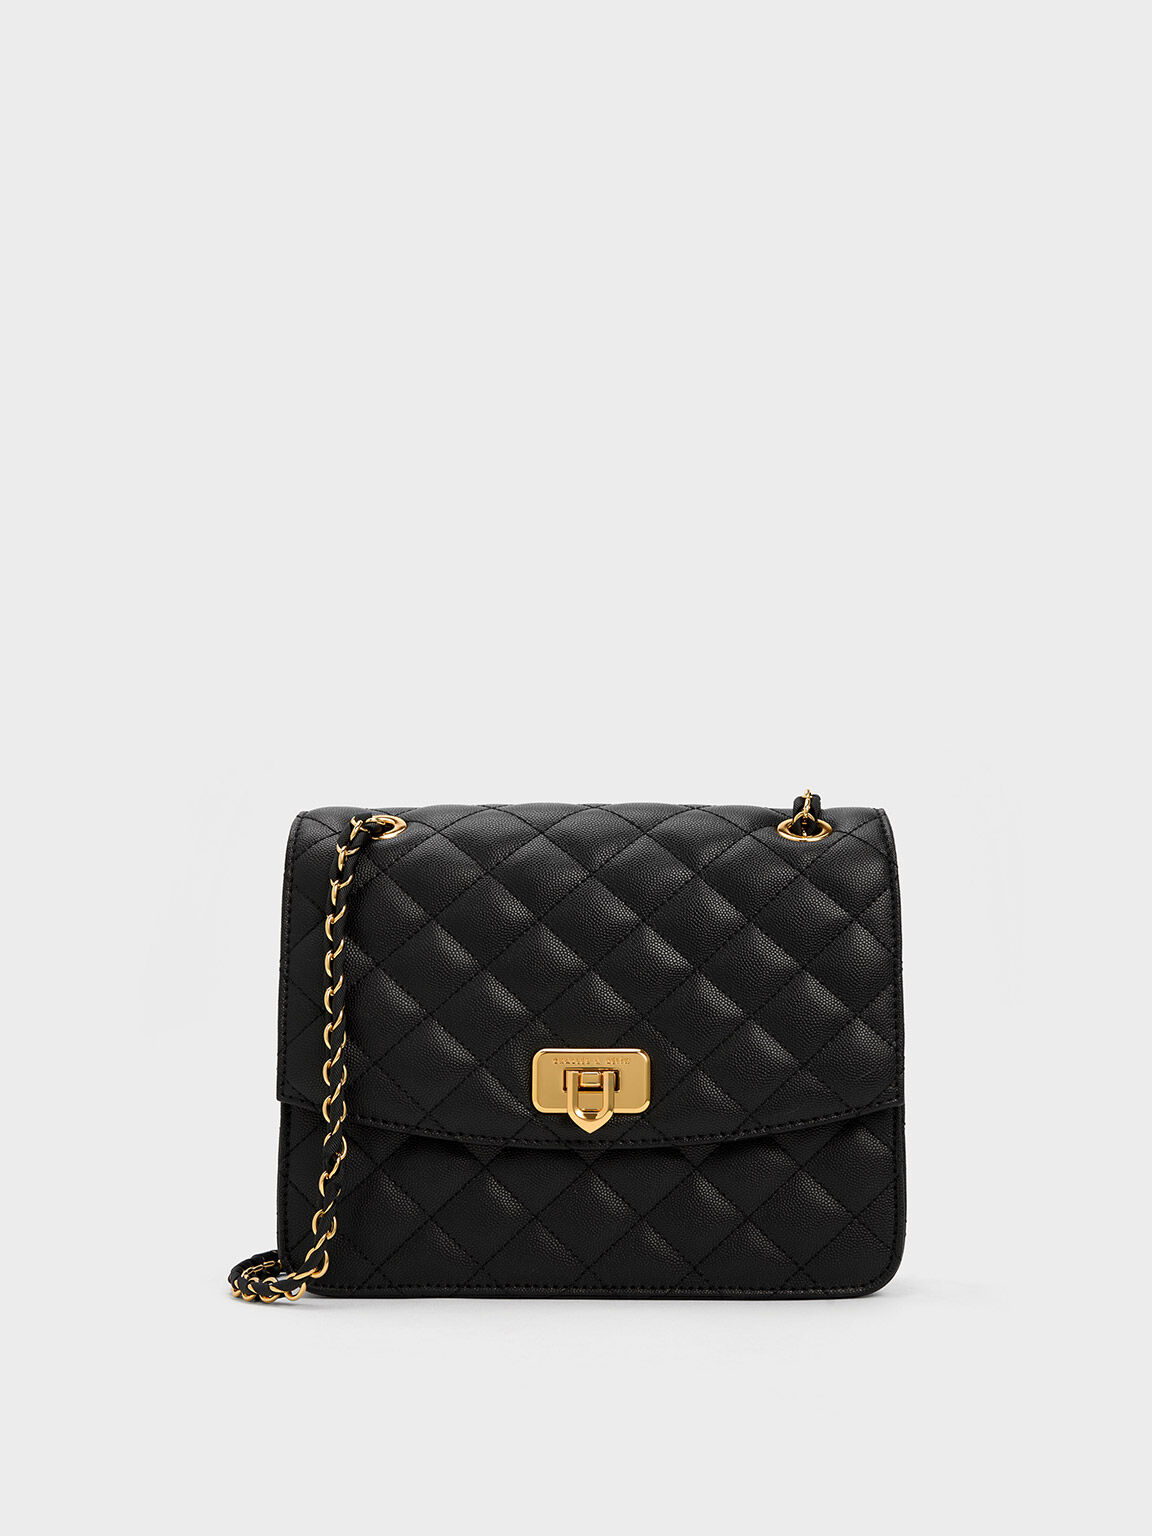 How do Asians buy expensive accessories like Chanel bags, shoes or